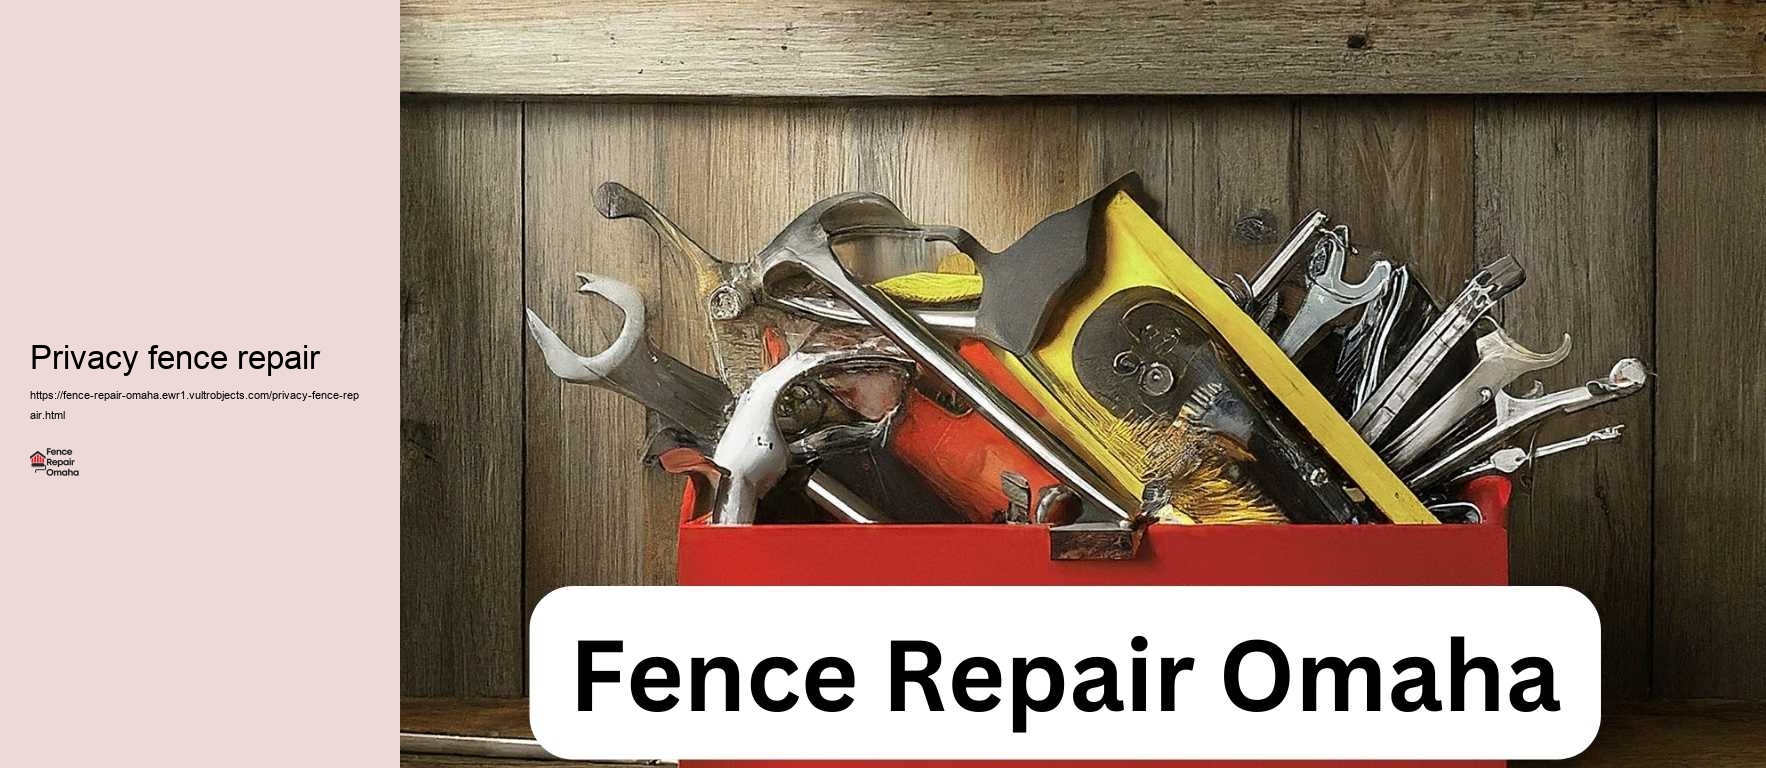 Privacy fence repair